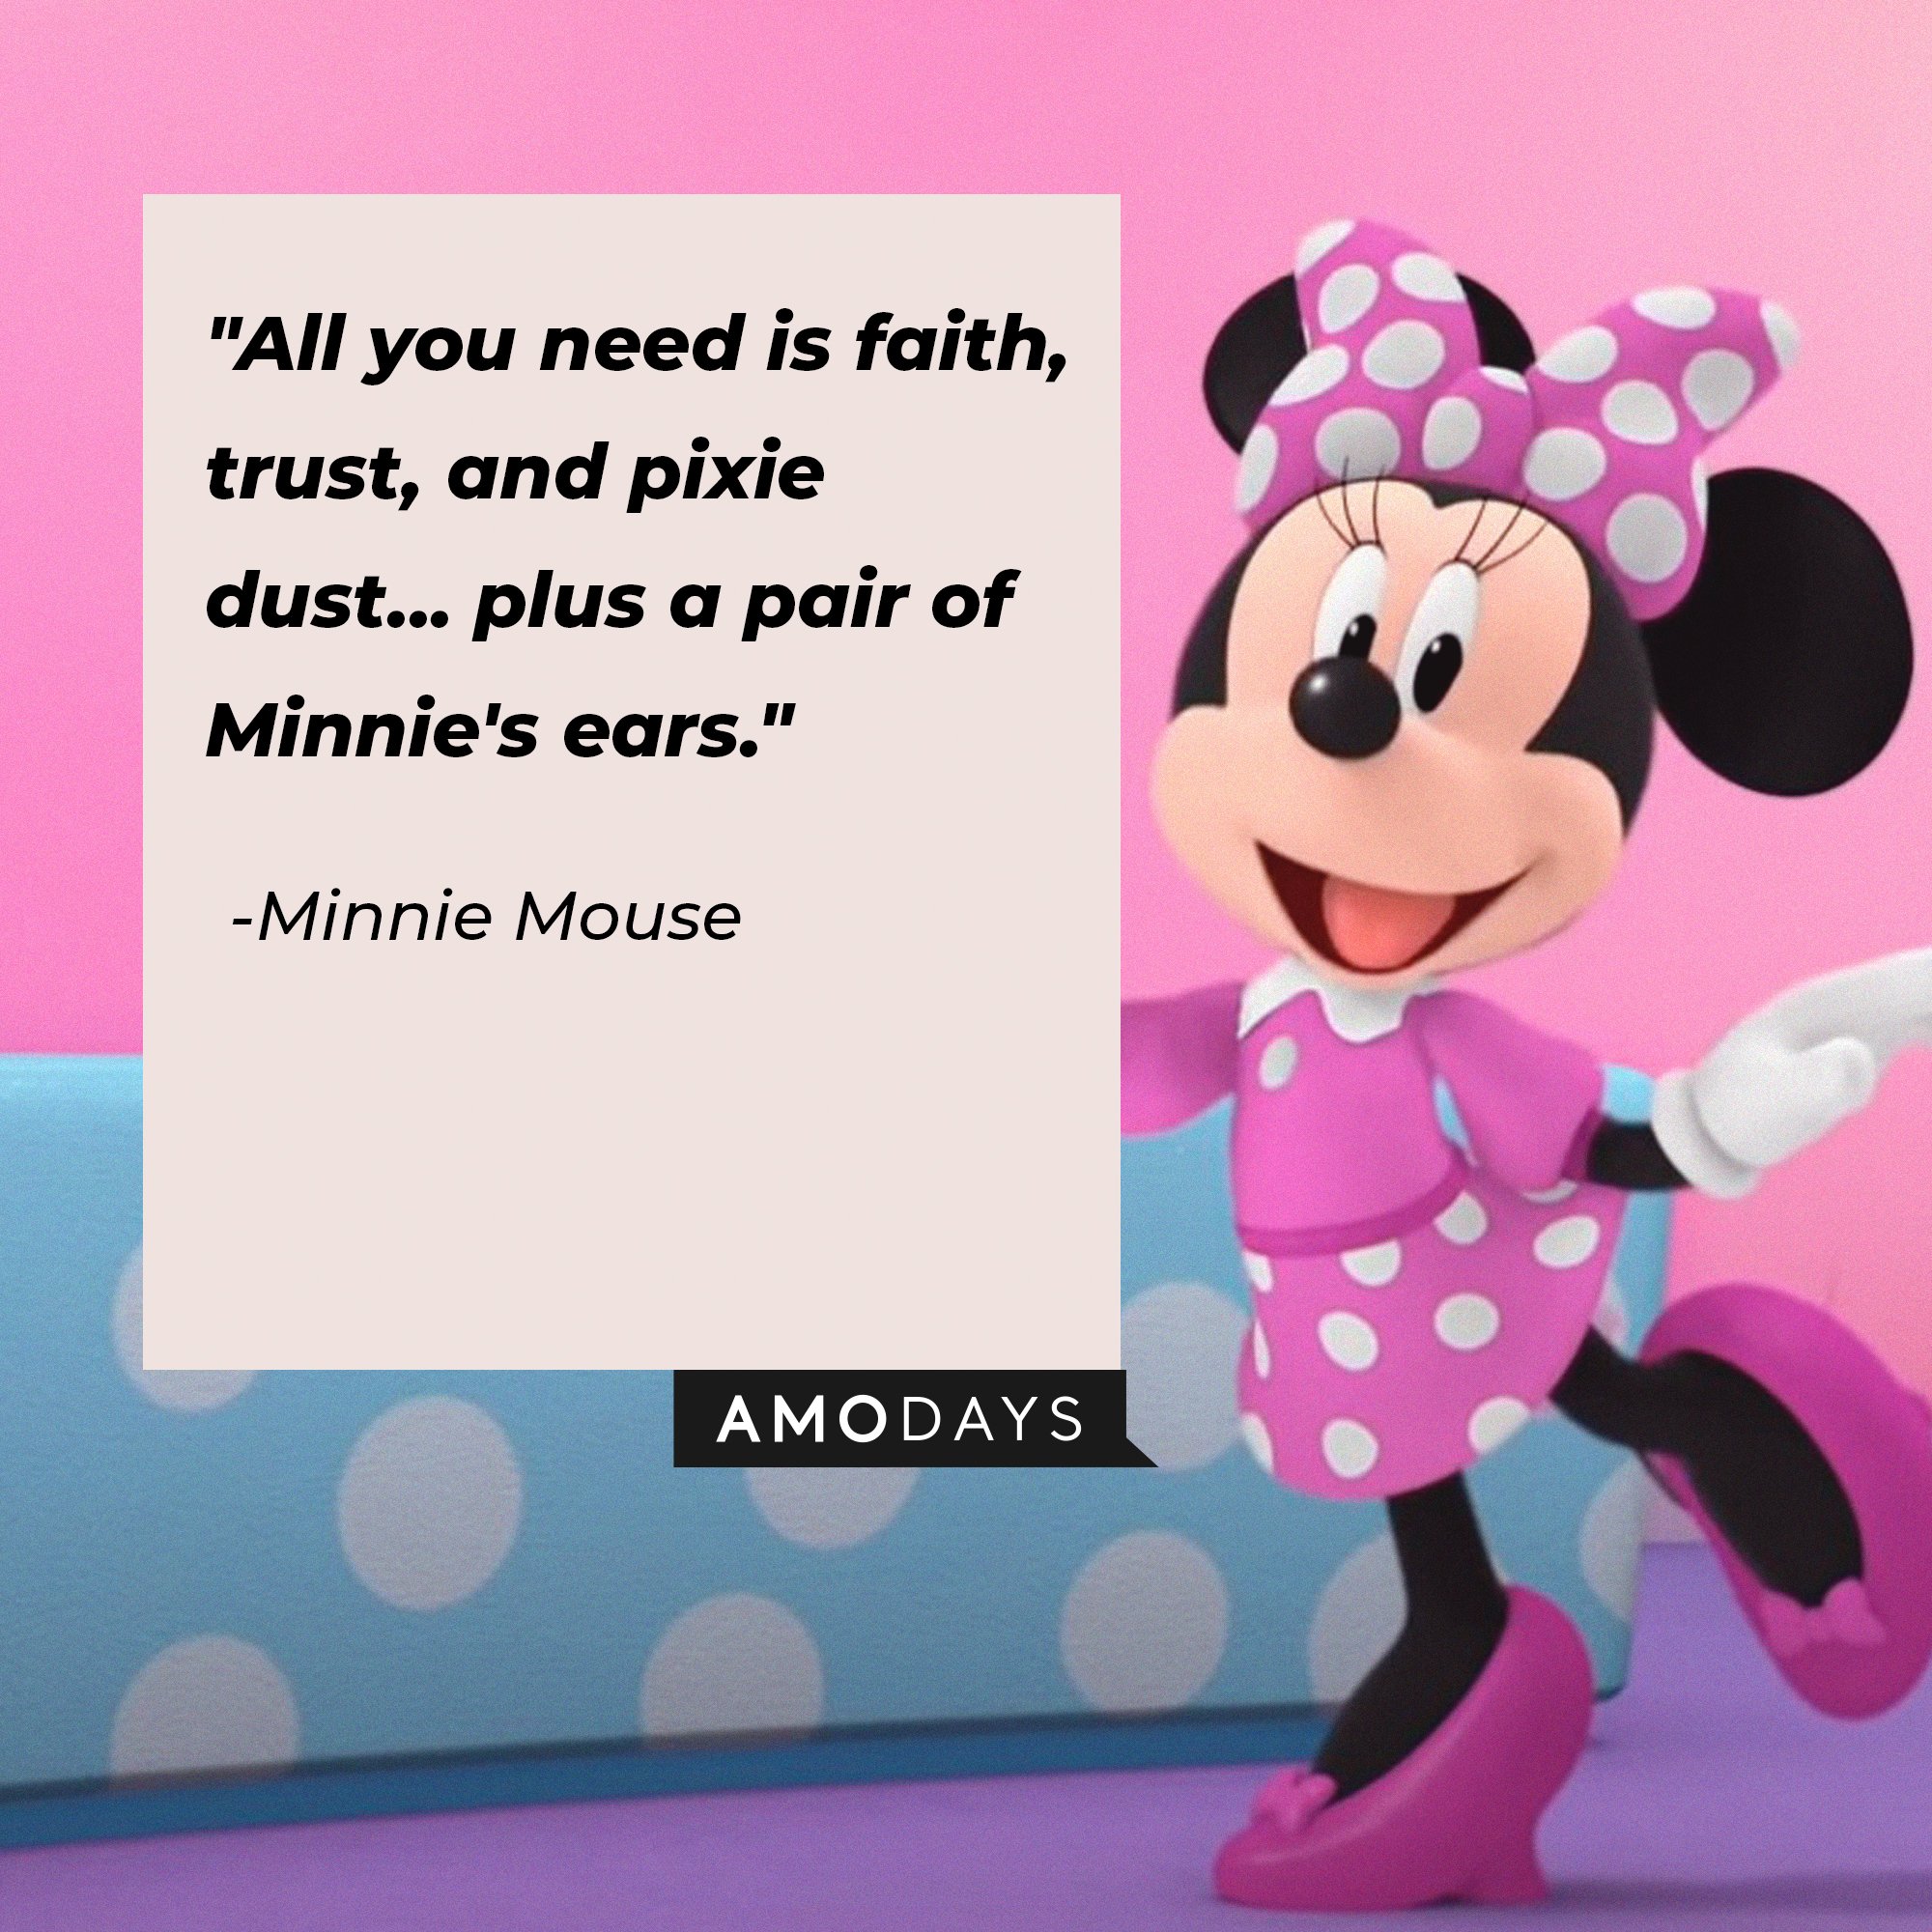 Minnie Mouse’s quote: "All you need is faith, trust, and pixie dust... plus a pair of Minnie's ears." | Image: AmoDays